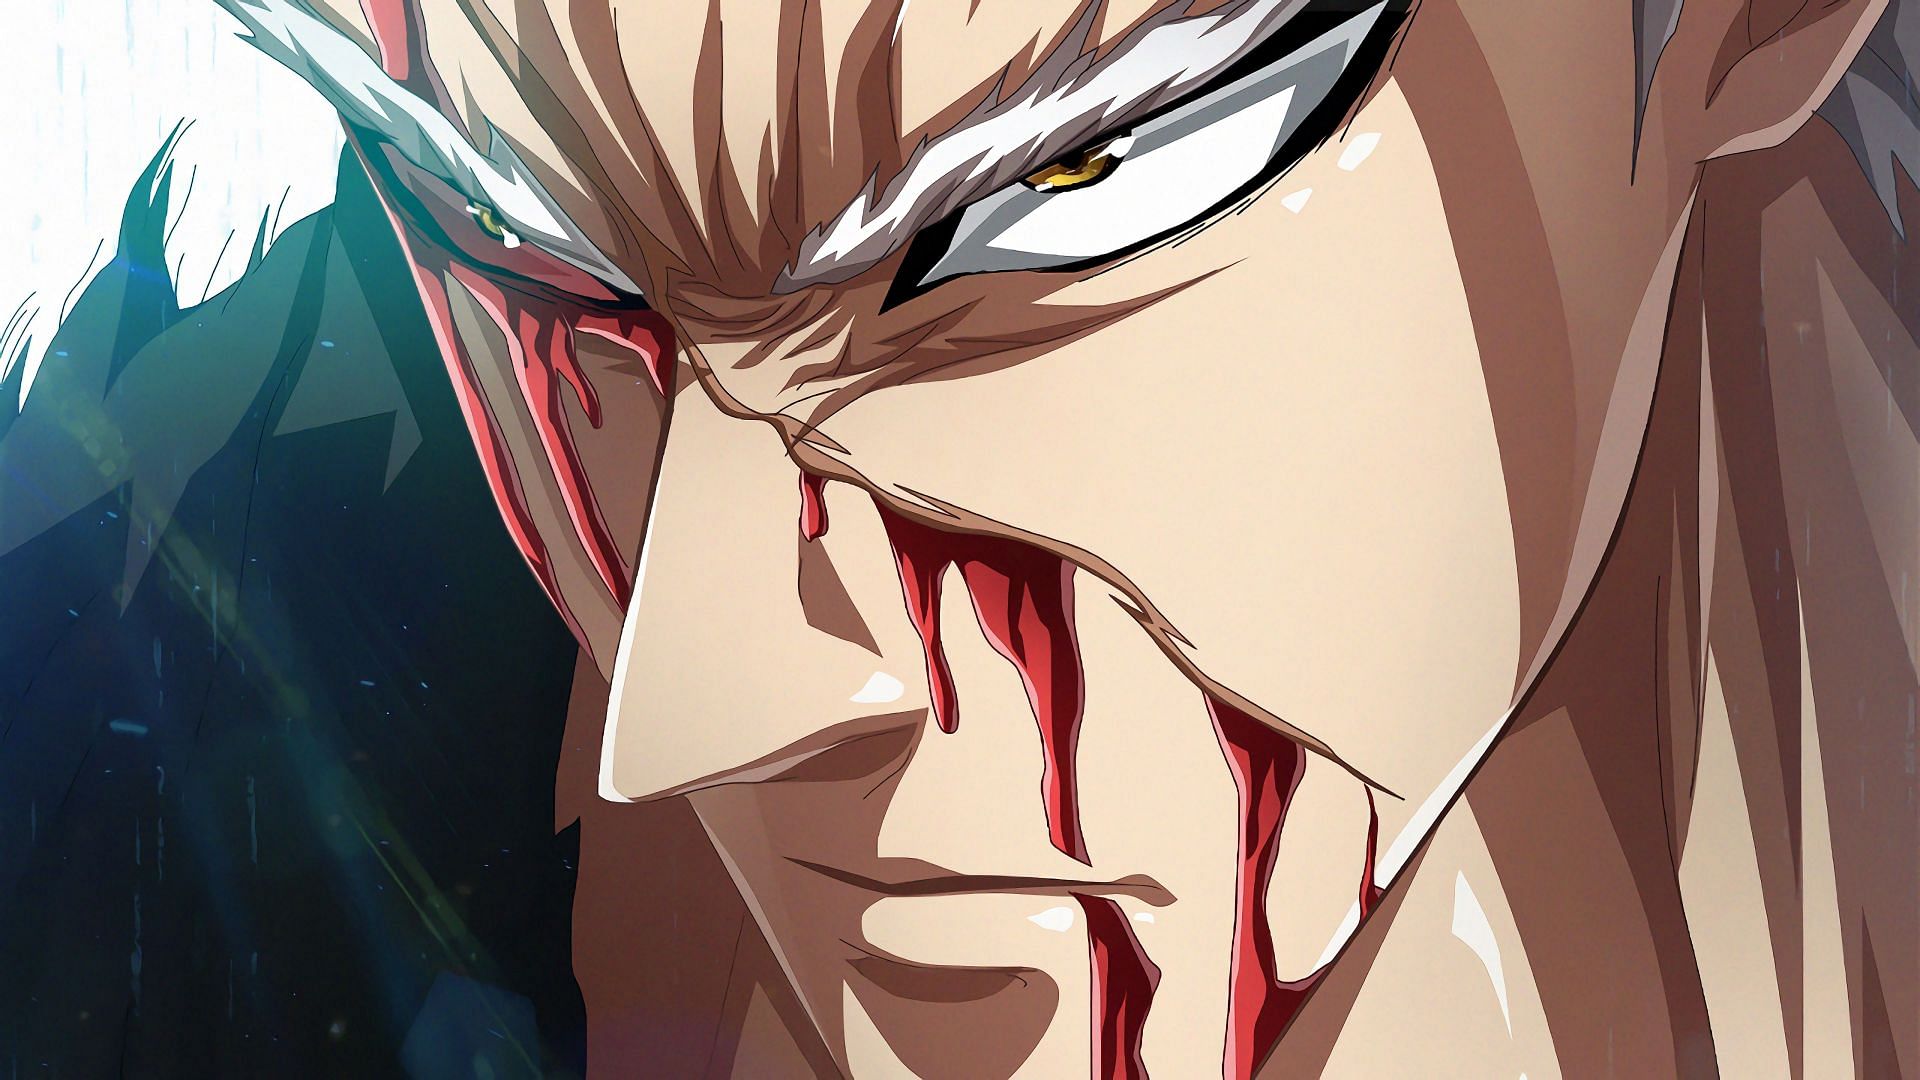 One Punch Man may see Garou's new avatar in future arcs